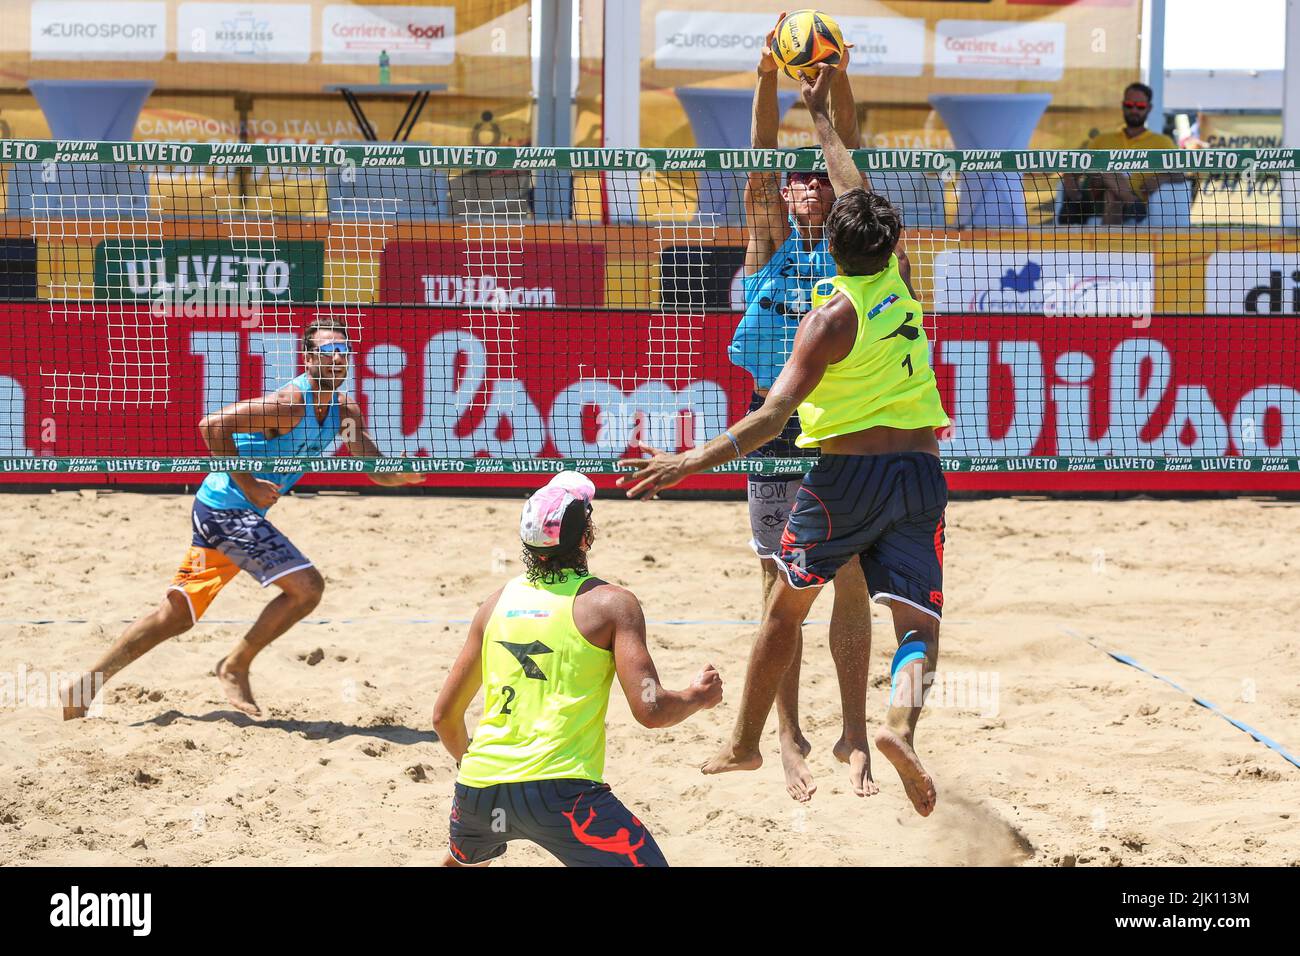 Termoli, Italy. 29th July, 2022. Polo Ingrosso blocks to wall Andrea Lupo  during Campionato Italiano Assoluto Gold (day1), Beach Volley in Termoli,  Italy, July 29 2022 Credit: Independent Photo Agency/Alamy Live News